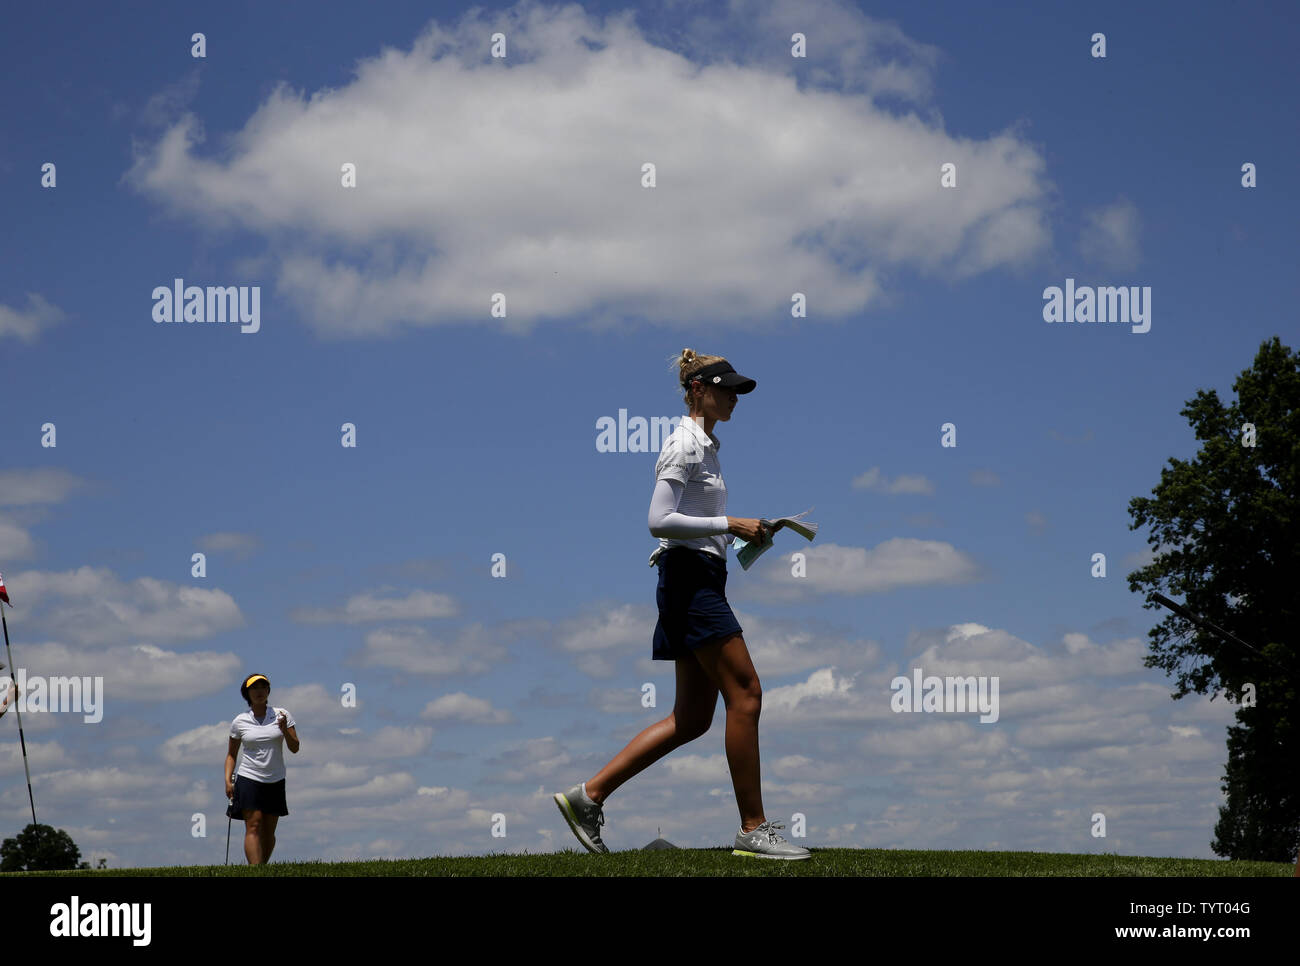 Nelly Korda walks off of the 15th green at Trump National Golf Club in the final round of the LPGA U.S. Women's Open Championship  in Bedminster, NJ on July 14, 2017. Sung Hyun Park wins her first major with a score of 11 under par.      Photo by John Angelillo/UPI Stock Photo